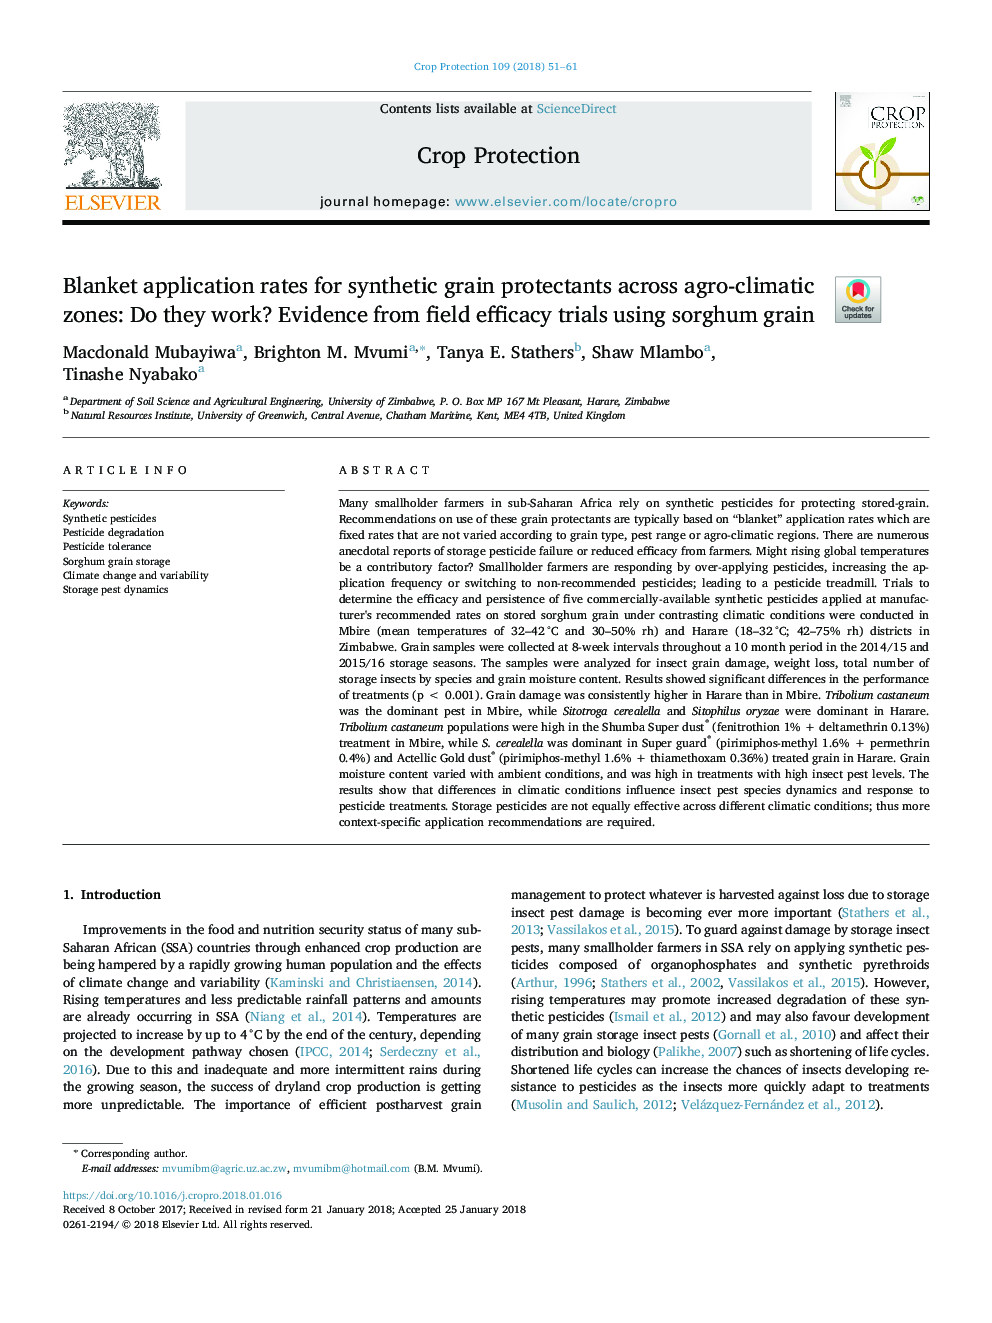 Blanket application rates for synthetic grain protectants across agro-climatic zones: Do they work? Evidence from field efficacy trials using sorghum grain